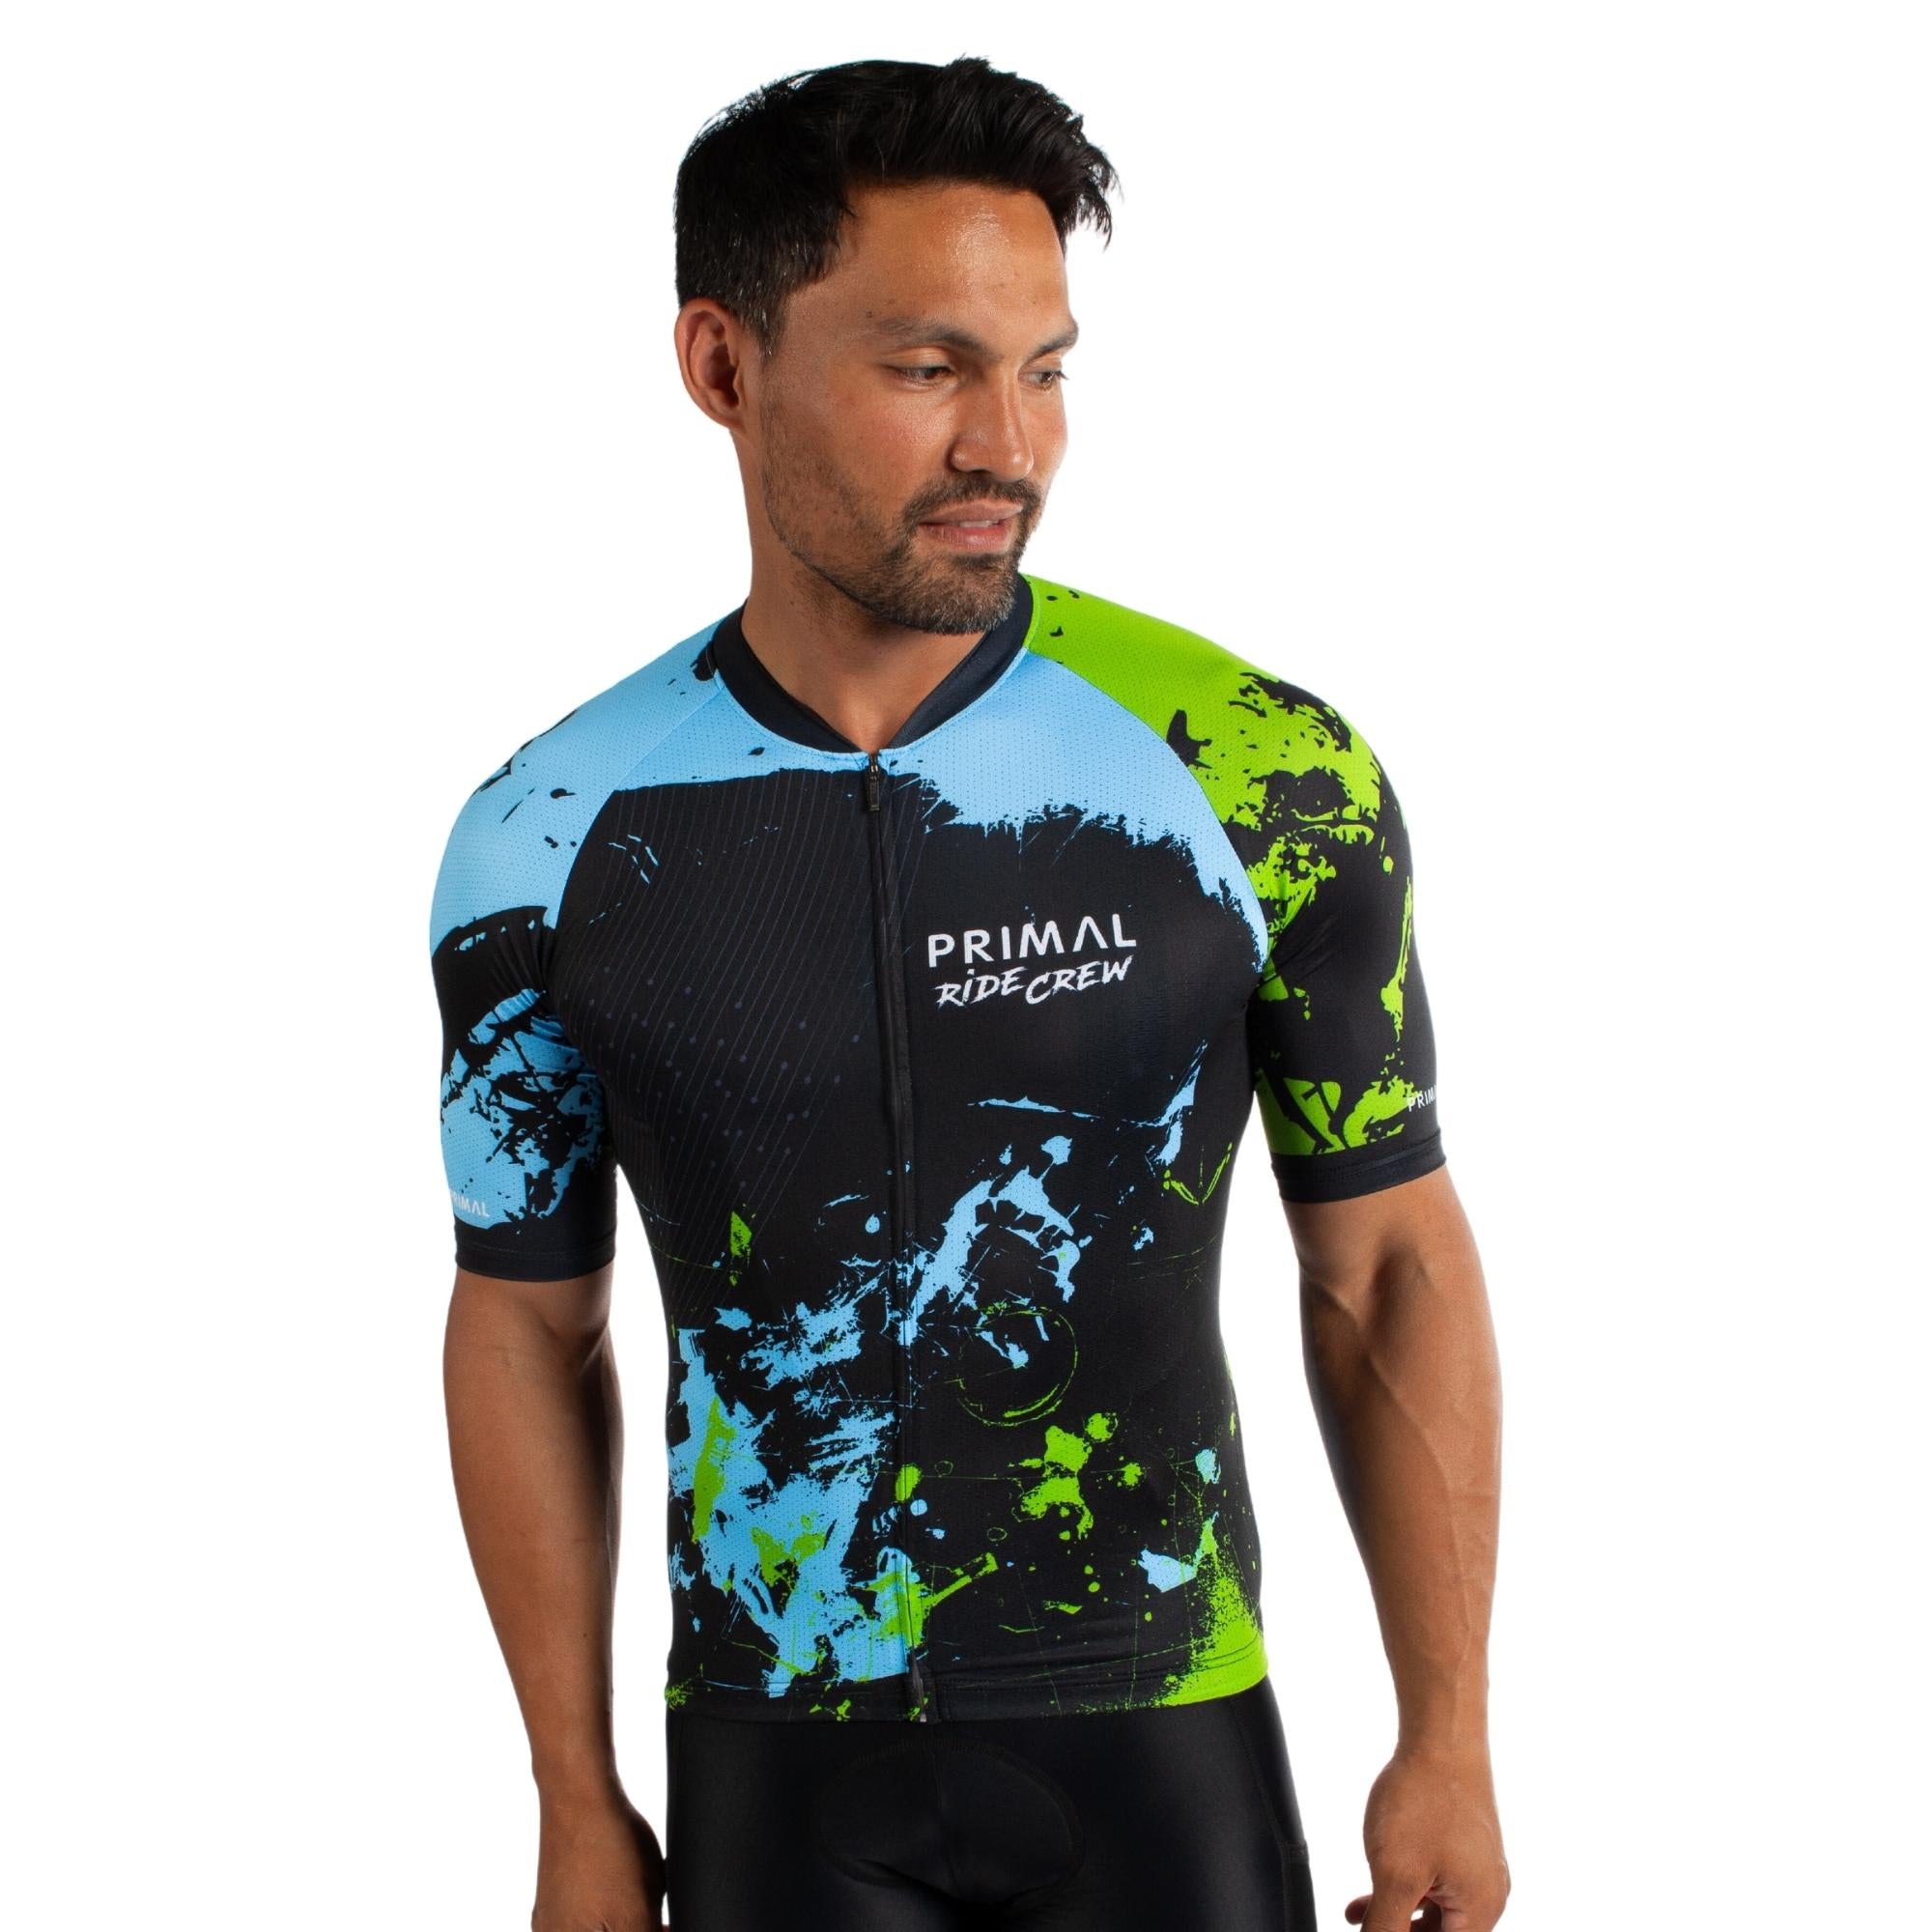 Primal Jersey Contest